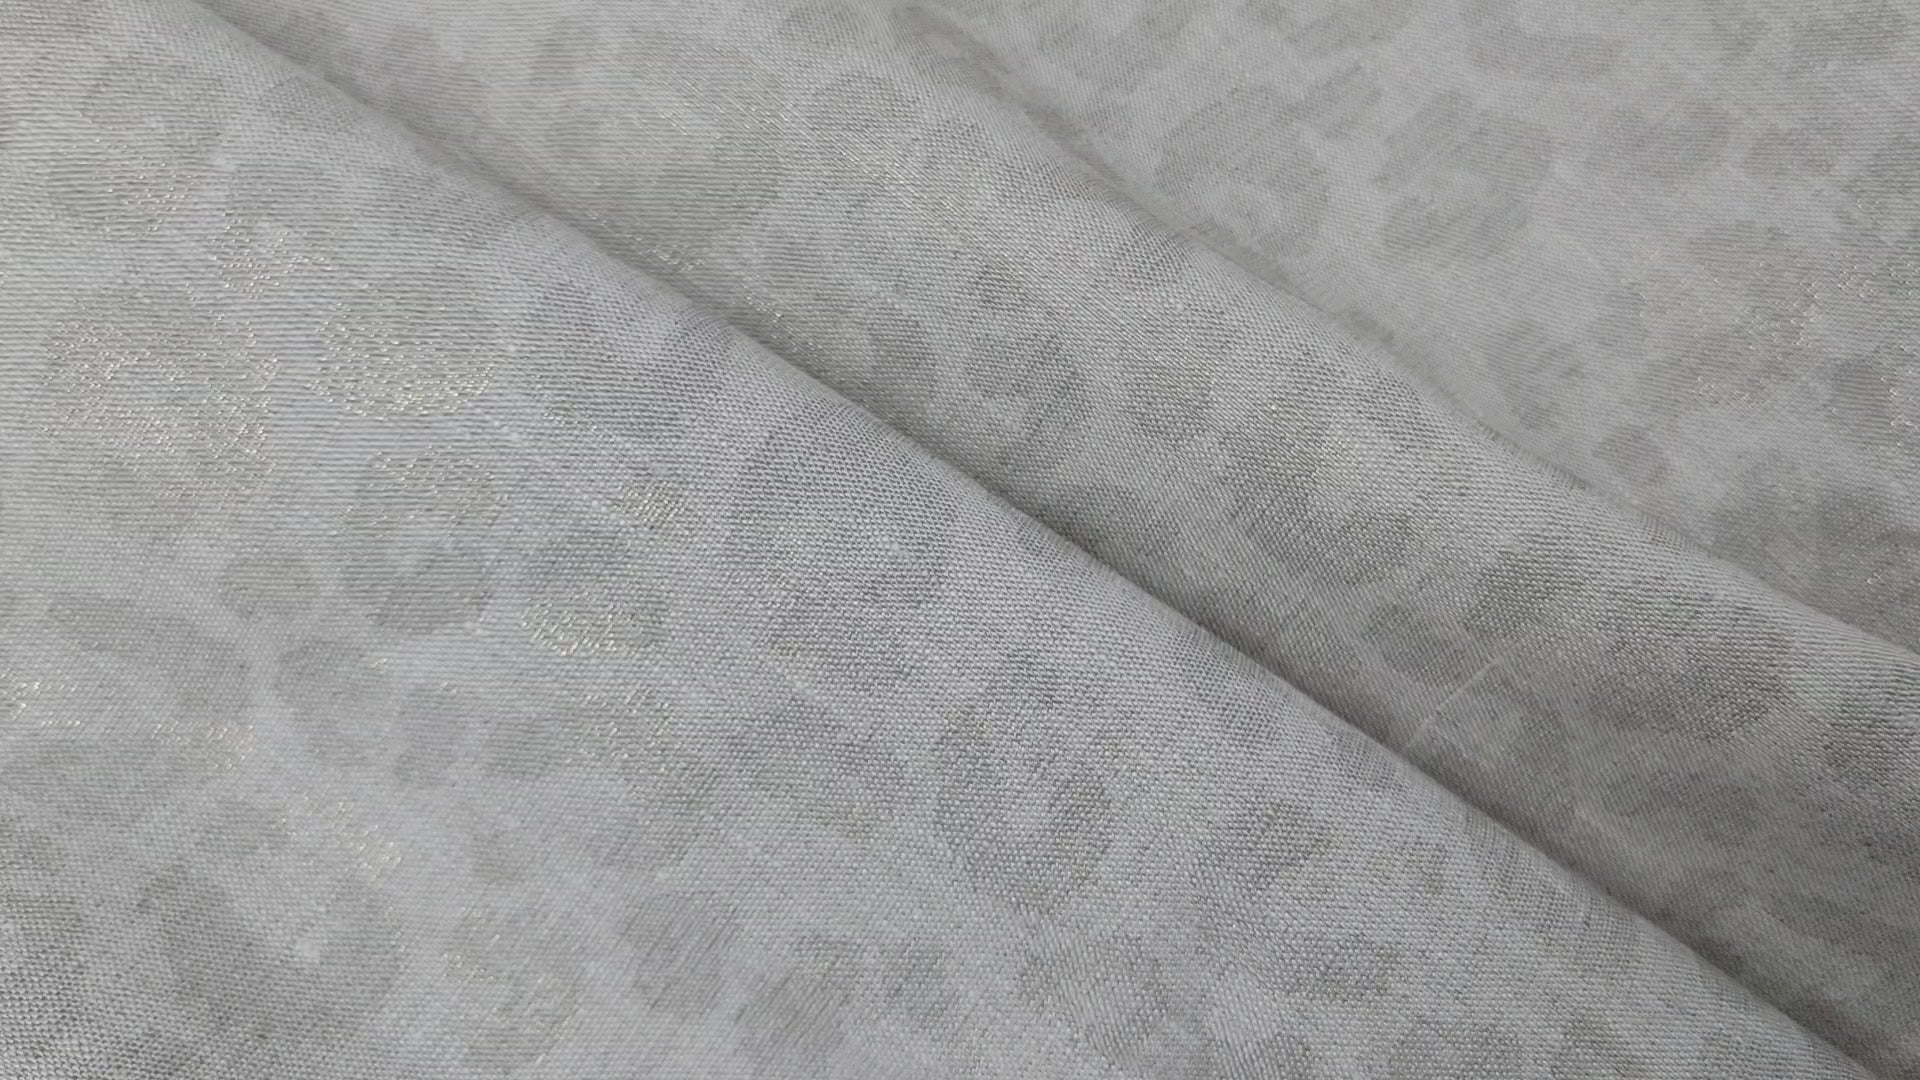 Luxe Safari Elegance: 100% Linen Fabric in Natural Hue with Gold Foil Leopard Print 1727